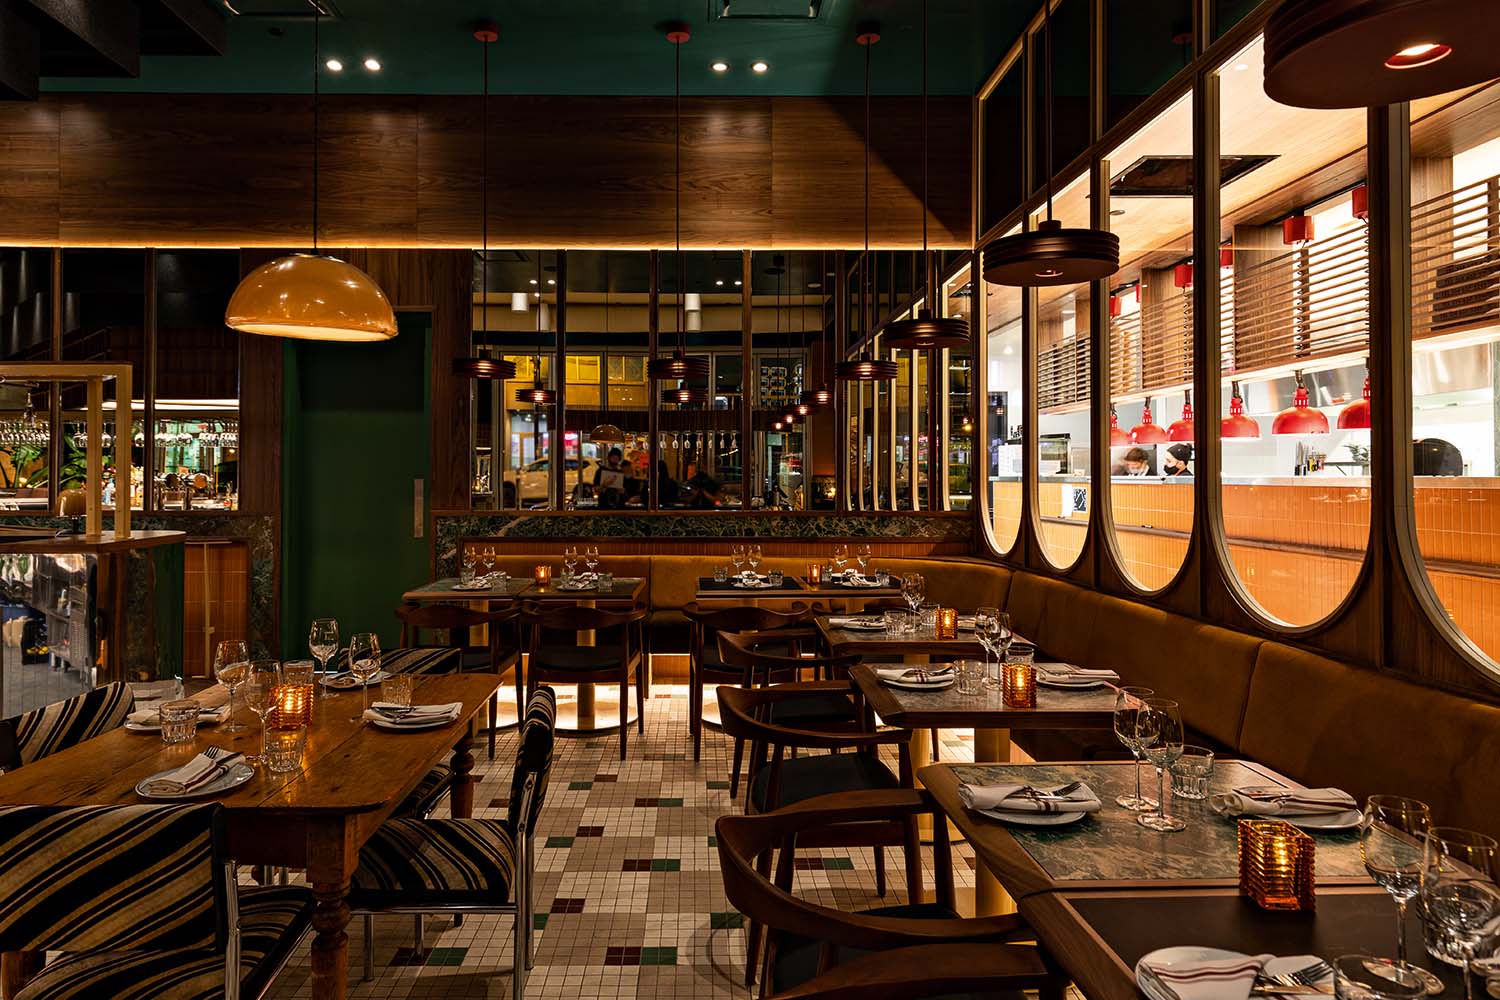 Tiramisu Restaurant - © David Dworkind, courtesy Ménard Dworkind architecture & design (MRDK) | The interior of the Tiramisu restaurant in Montréal’s Chinatown updates the atmosphere of a 1960s Italian eatery to a contemporary, international setting.